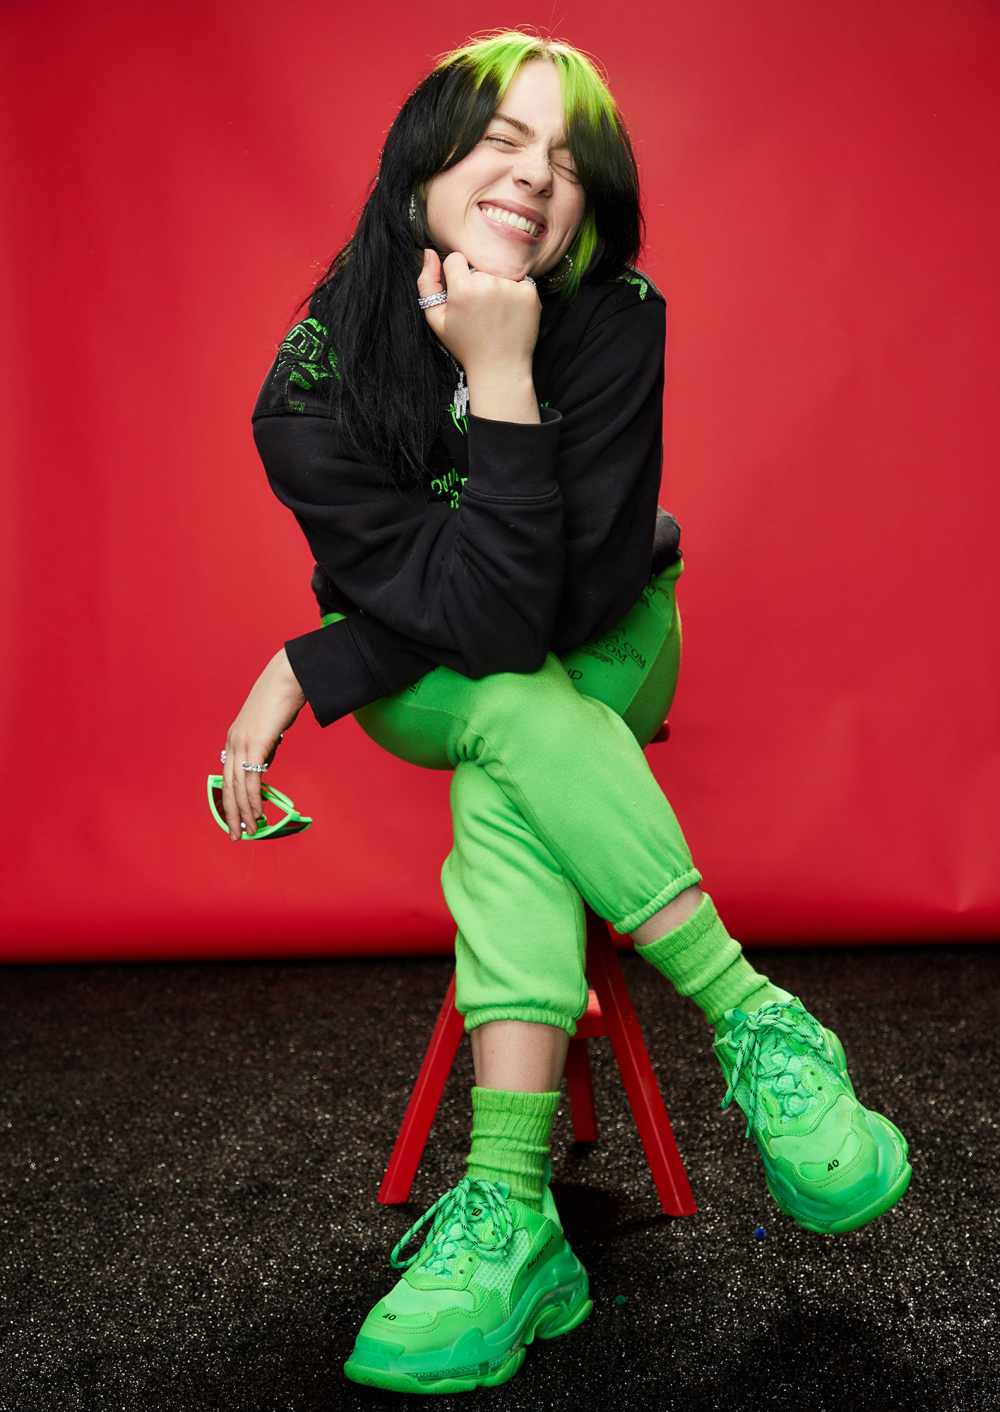 Billie Eilish Is ‘in a Much Better Place’ After Adjusting to Newfound Fame